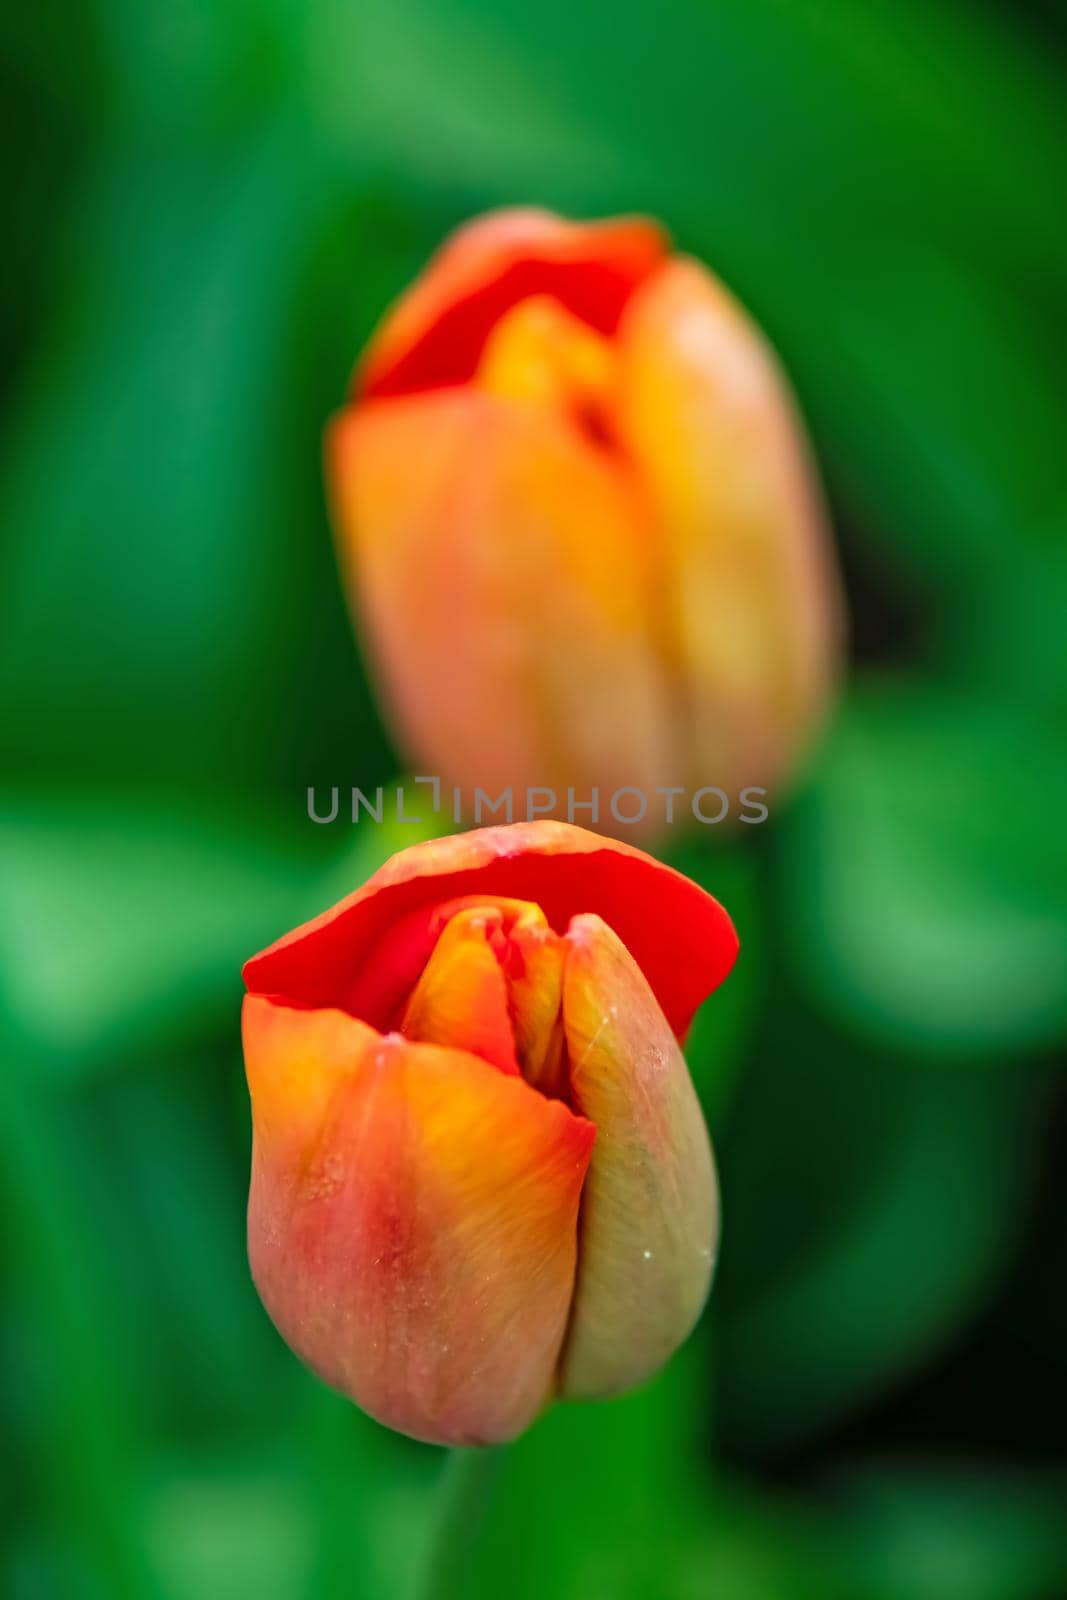 tulip flowers in april and spring season